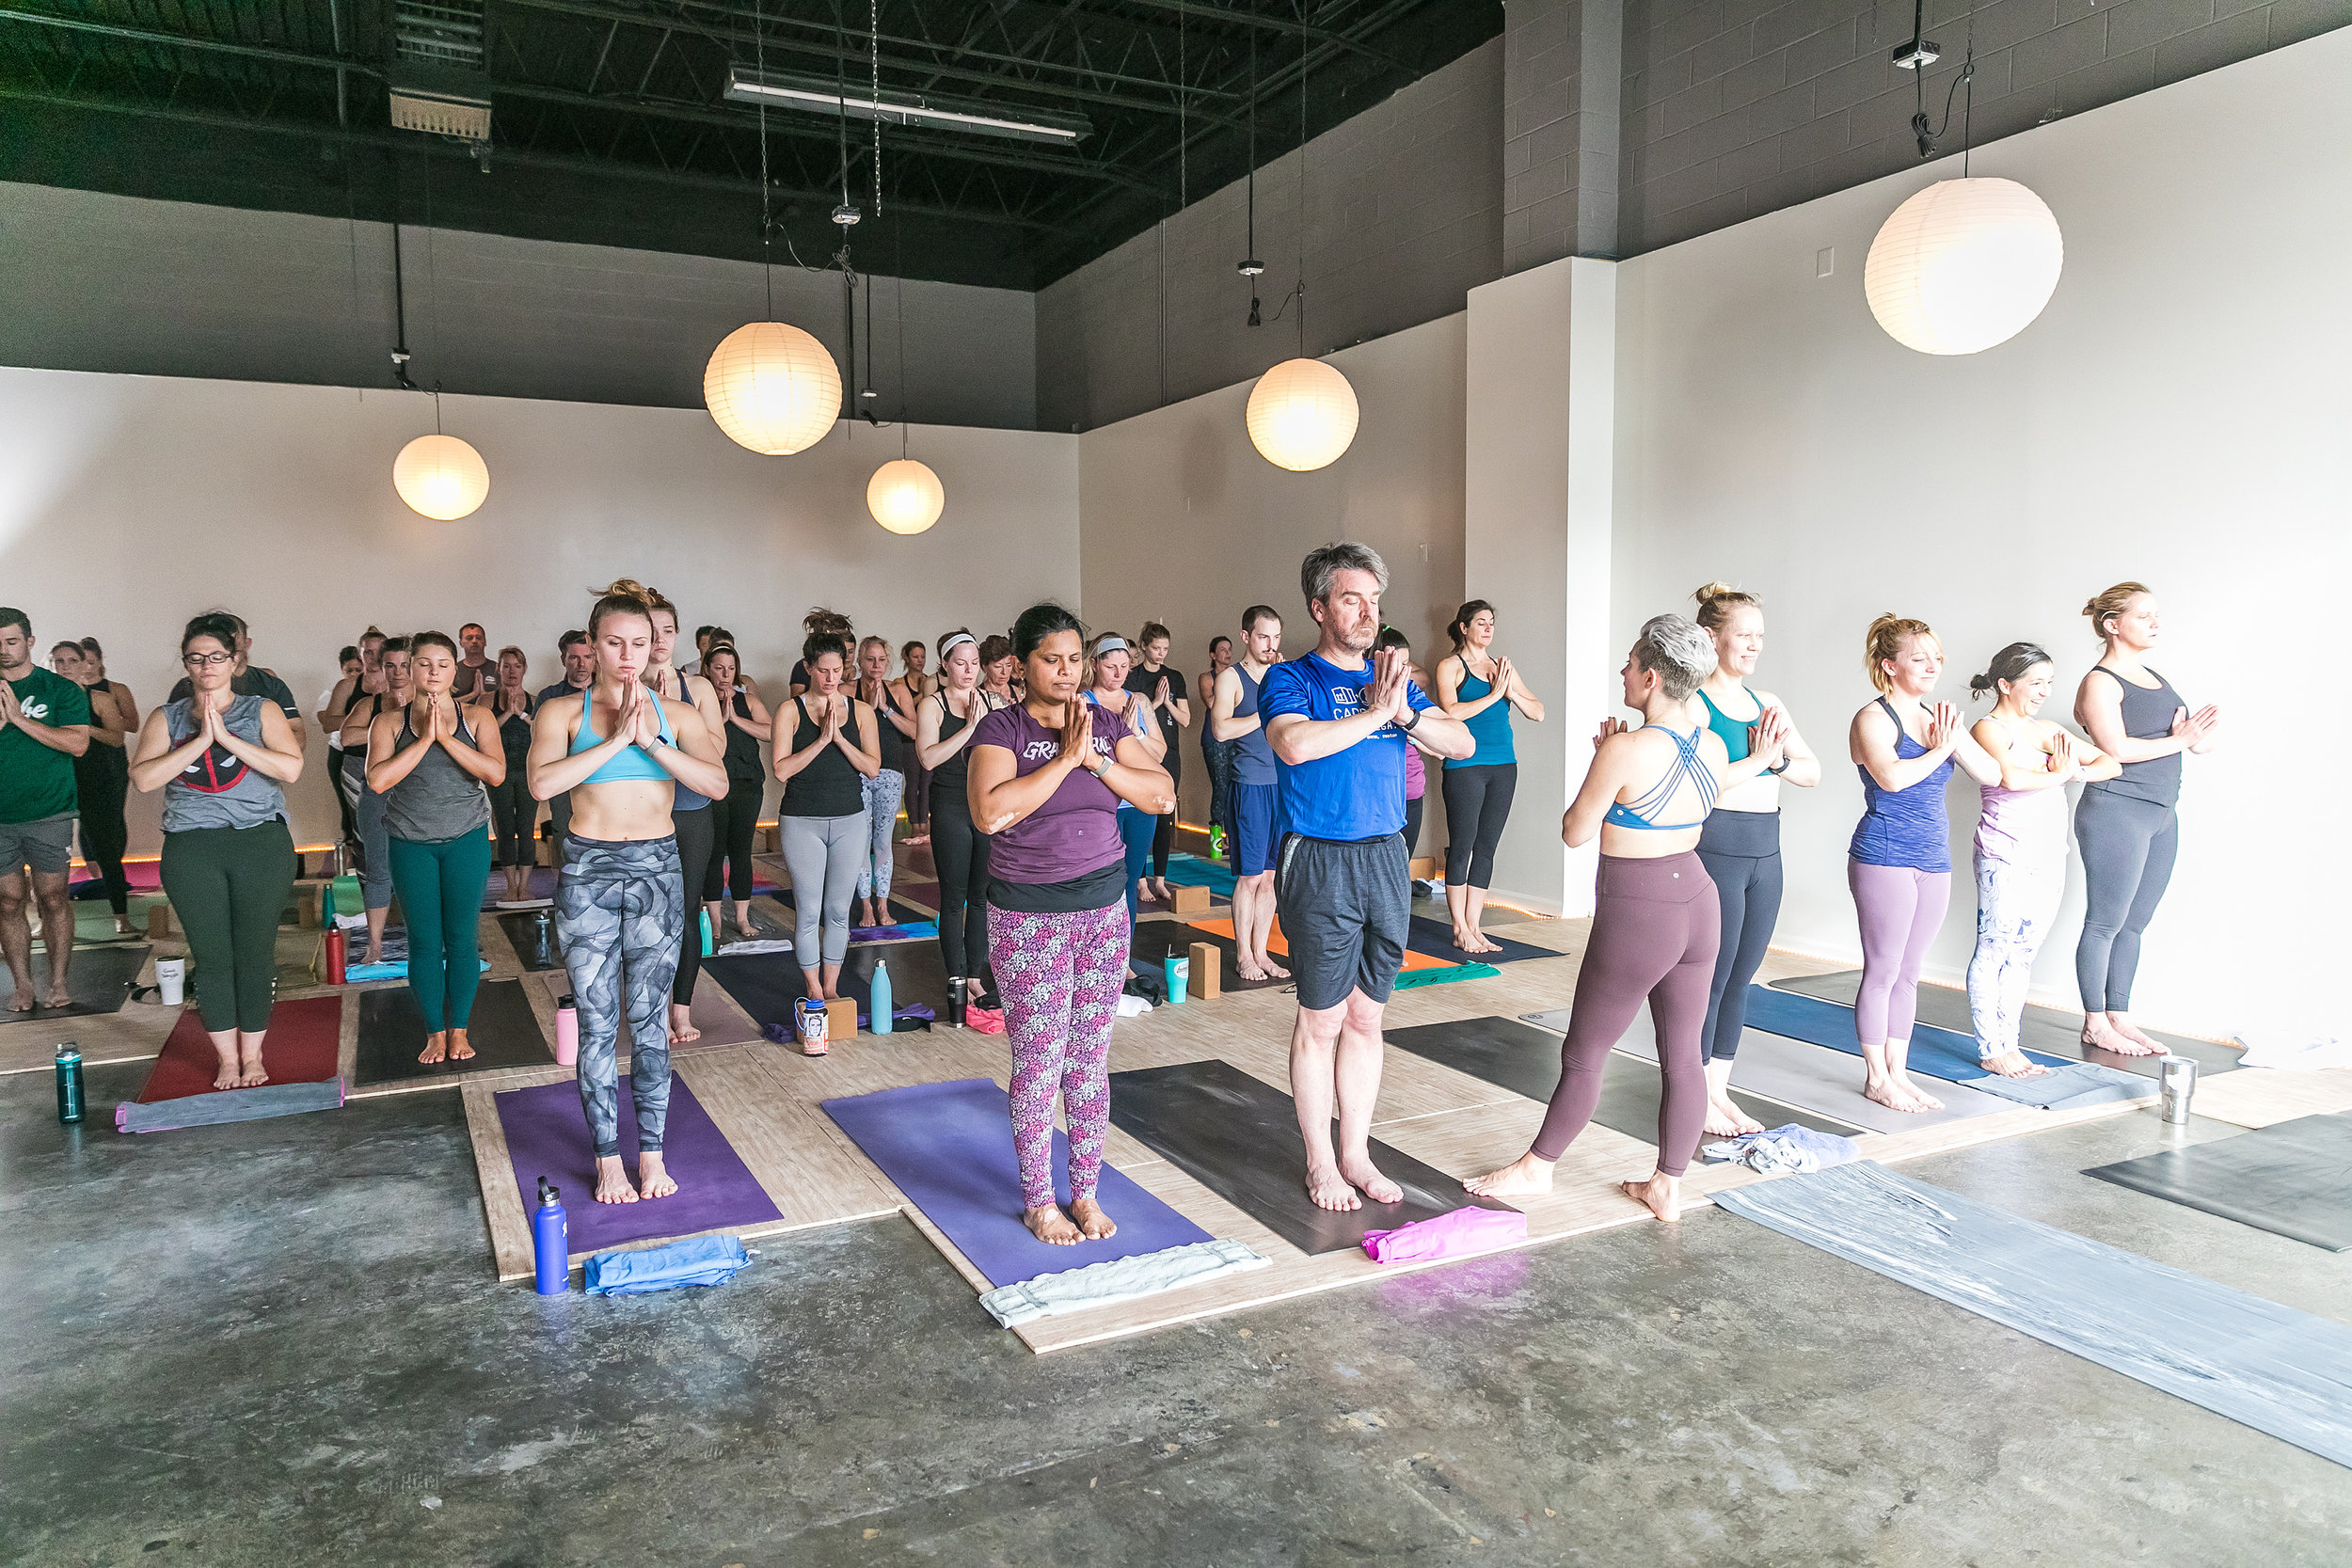 Homegrown Yoga - Wednesday at Homegrown: 6:00am - Hot Power Hour